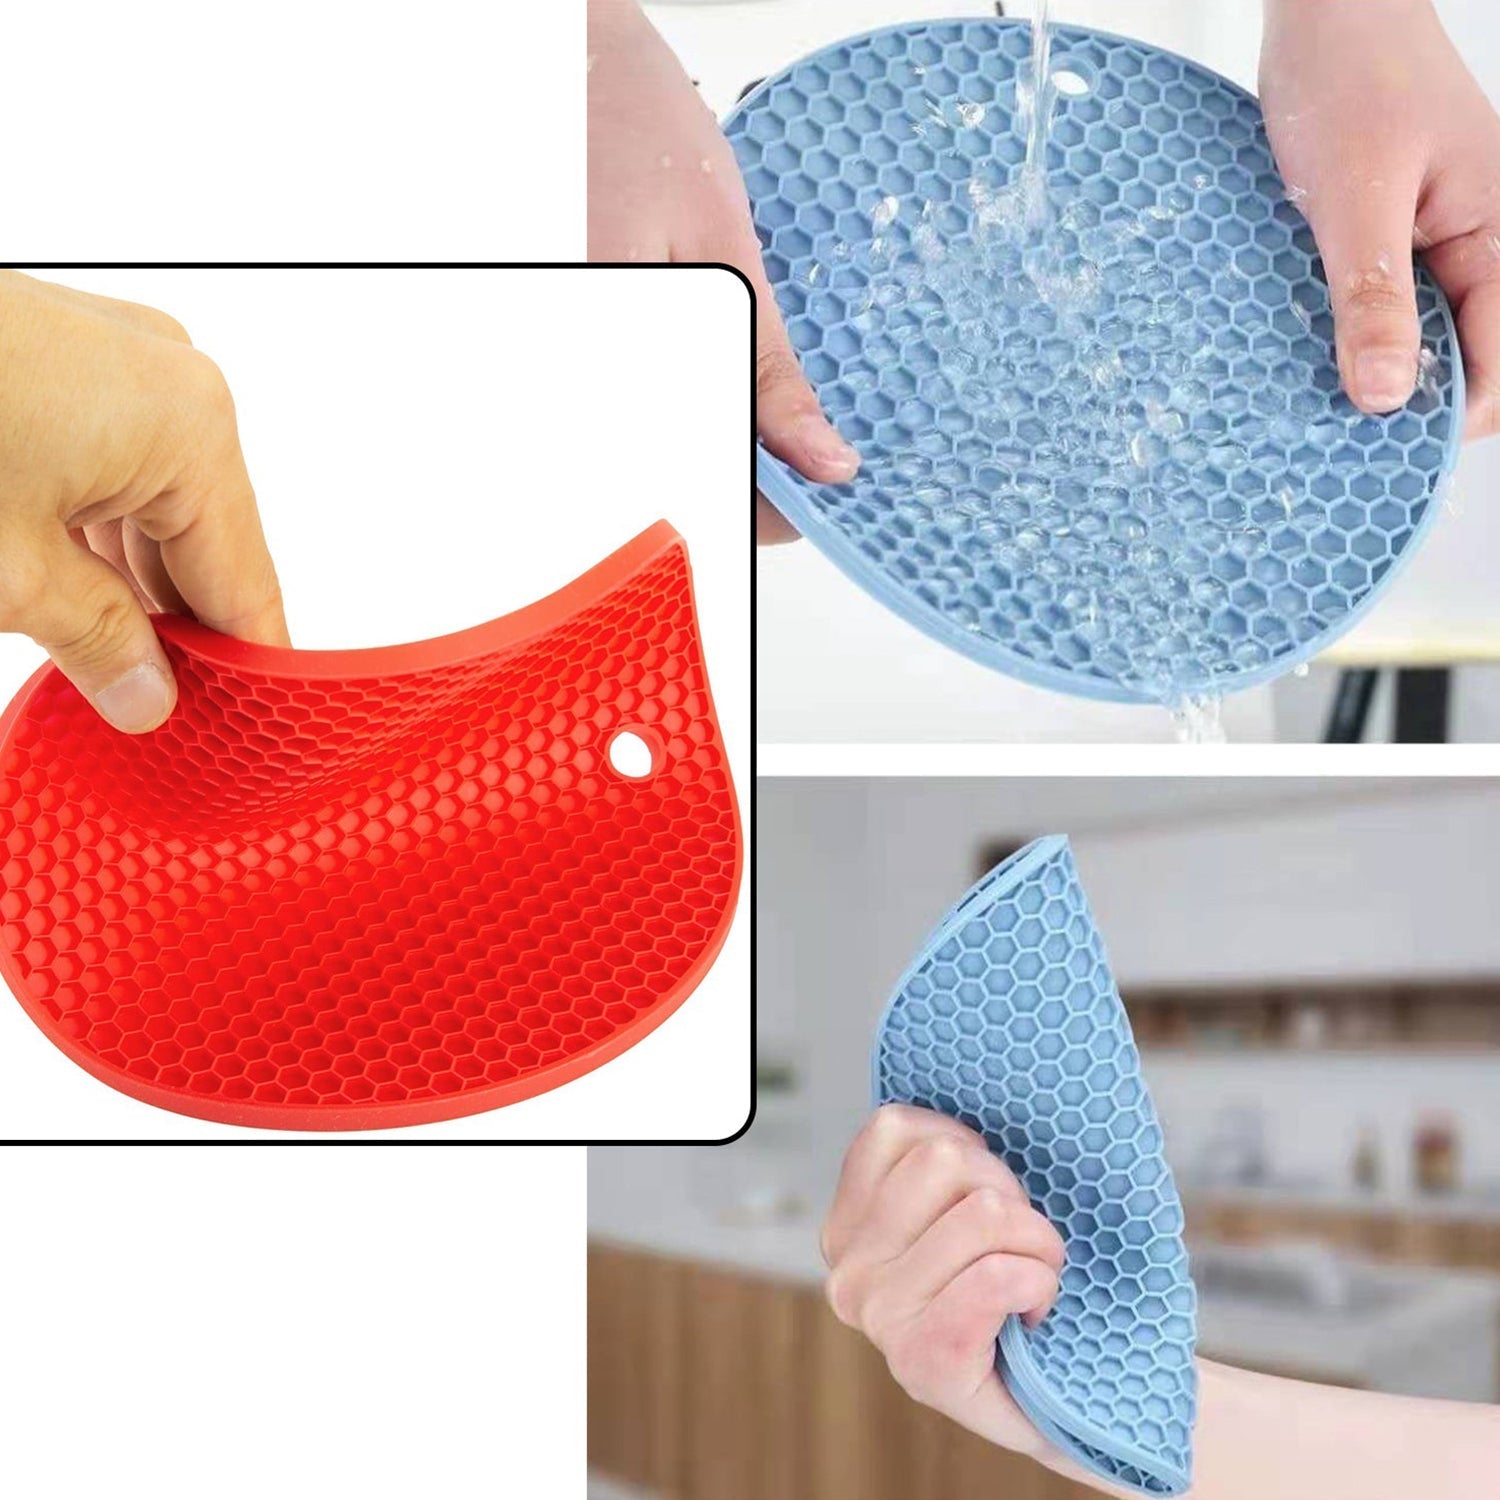 4846 4 Pc Silicon Hot Mat For Placing Hot Vessels And Utensils Over It Easily Without Having Any Visible Marks On Surfaces.